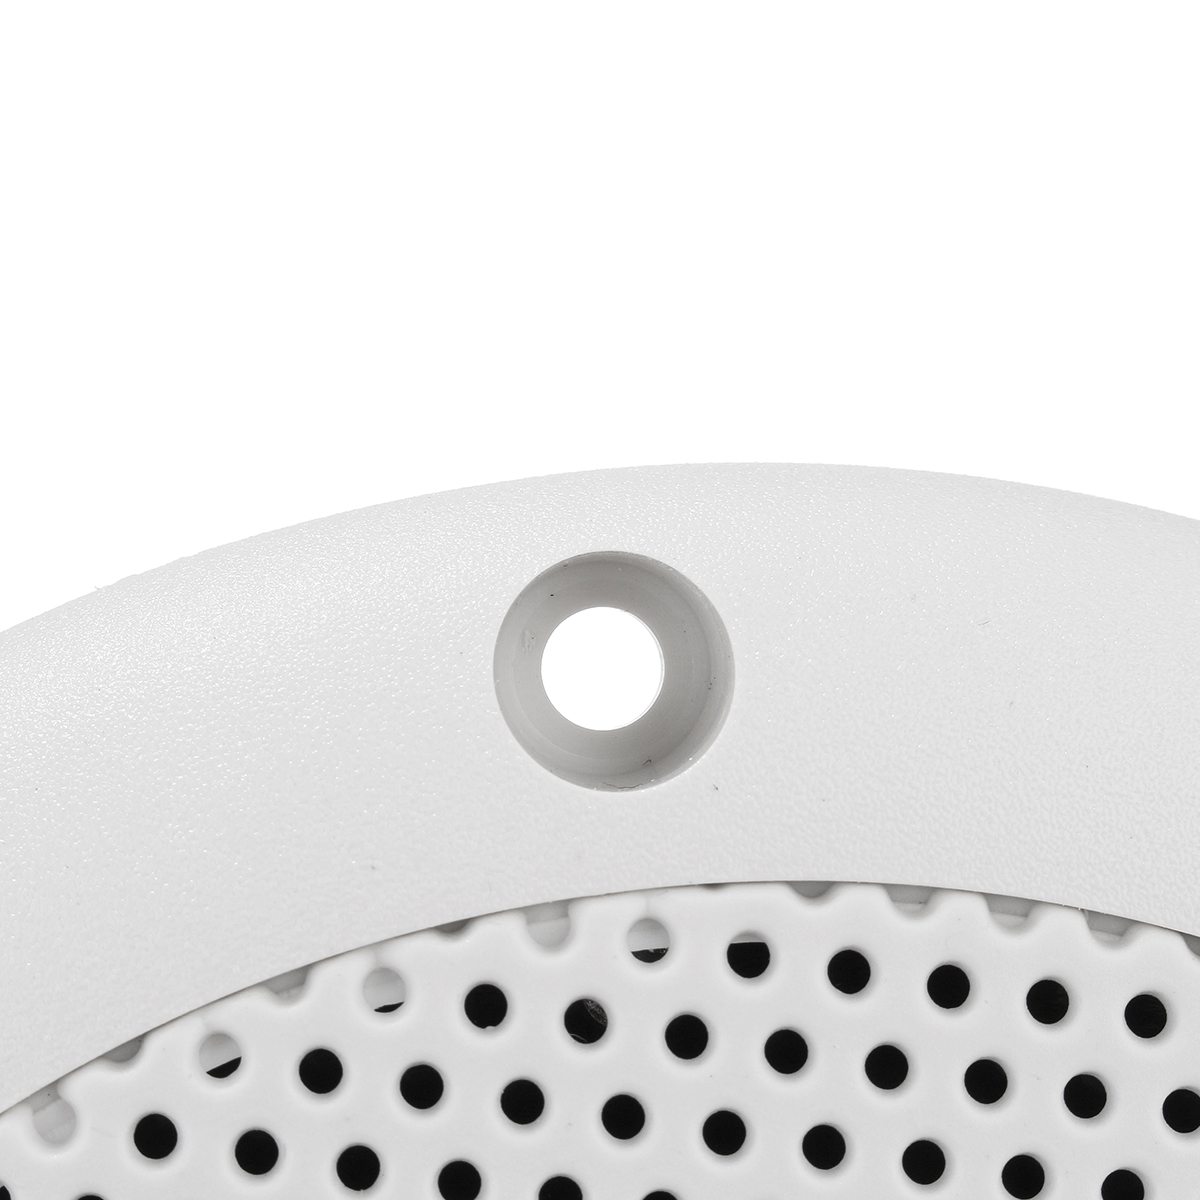 Find 1 Pair Waterproof Marine Boat Ceiling Speakers Kitchen Bathroom Water Resistant for Sale on Gipsybee.com with cryptocurrencies